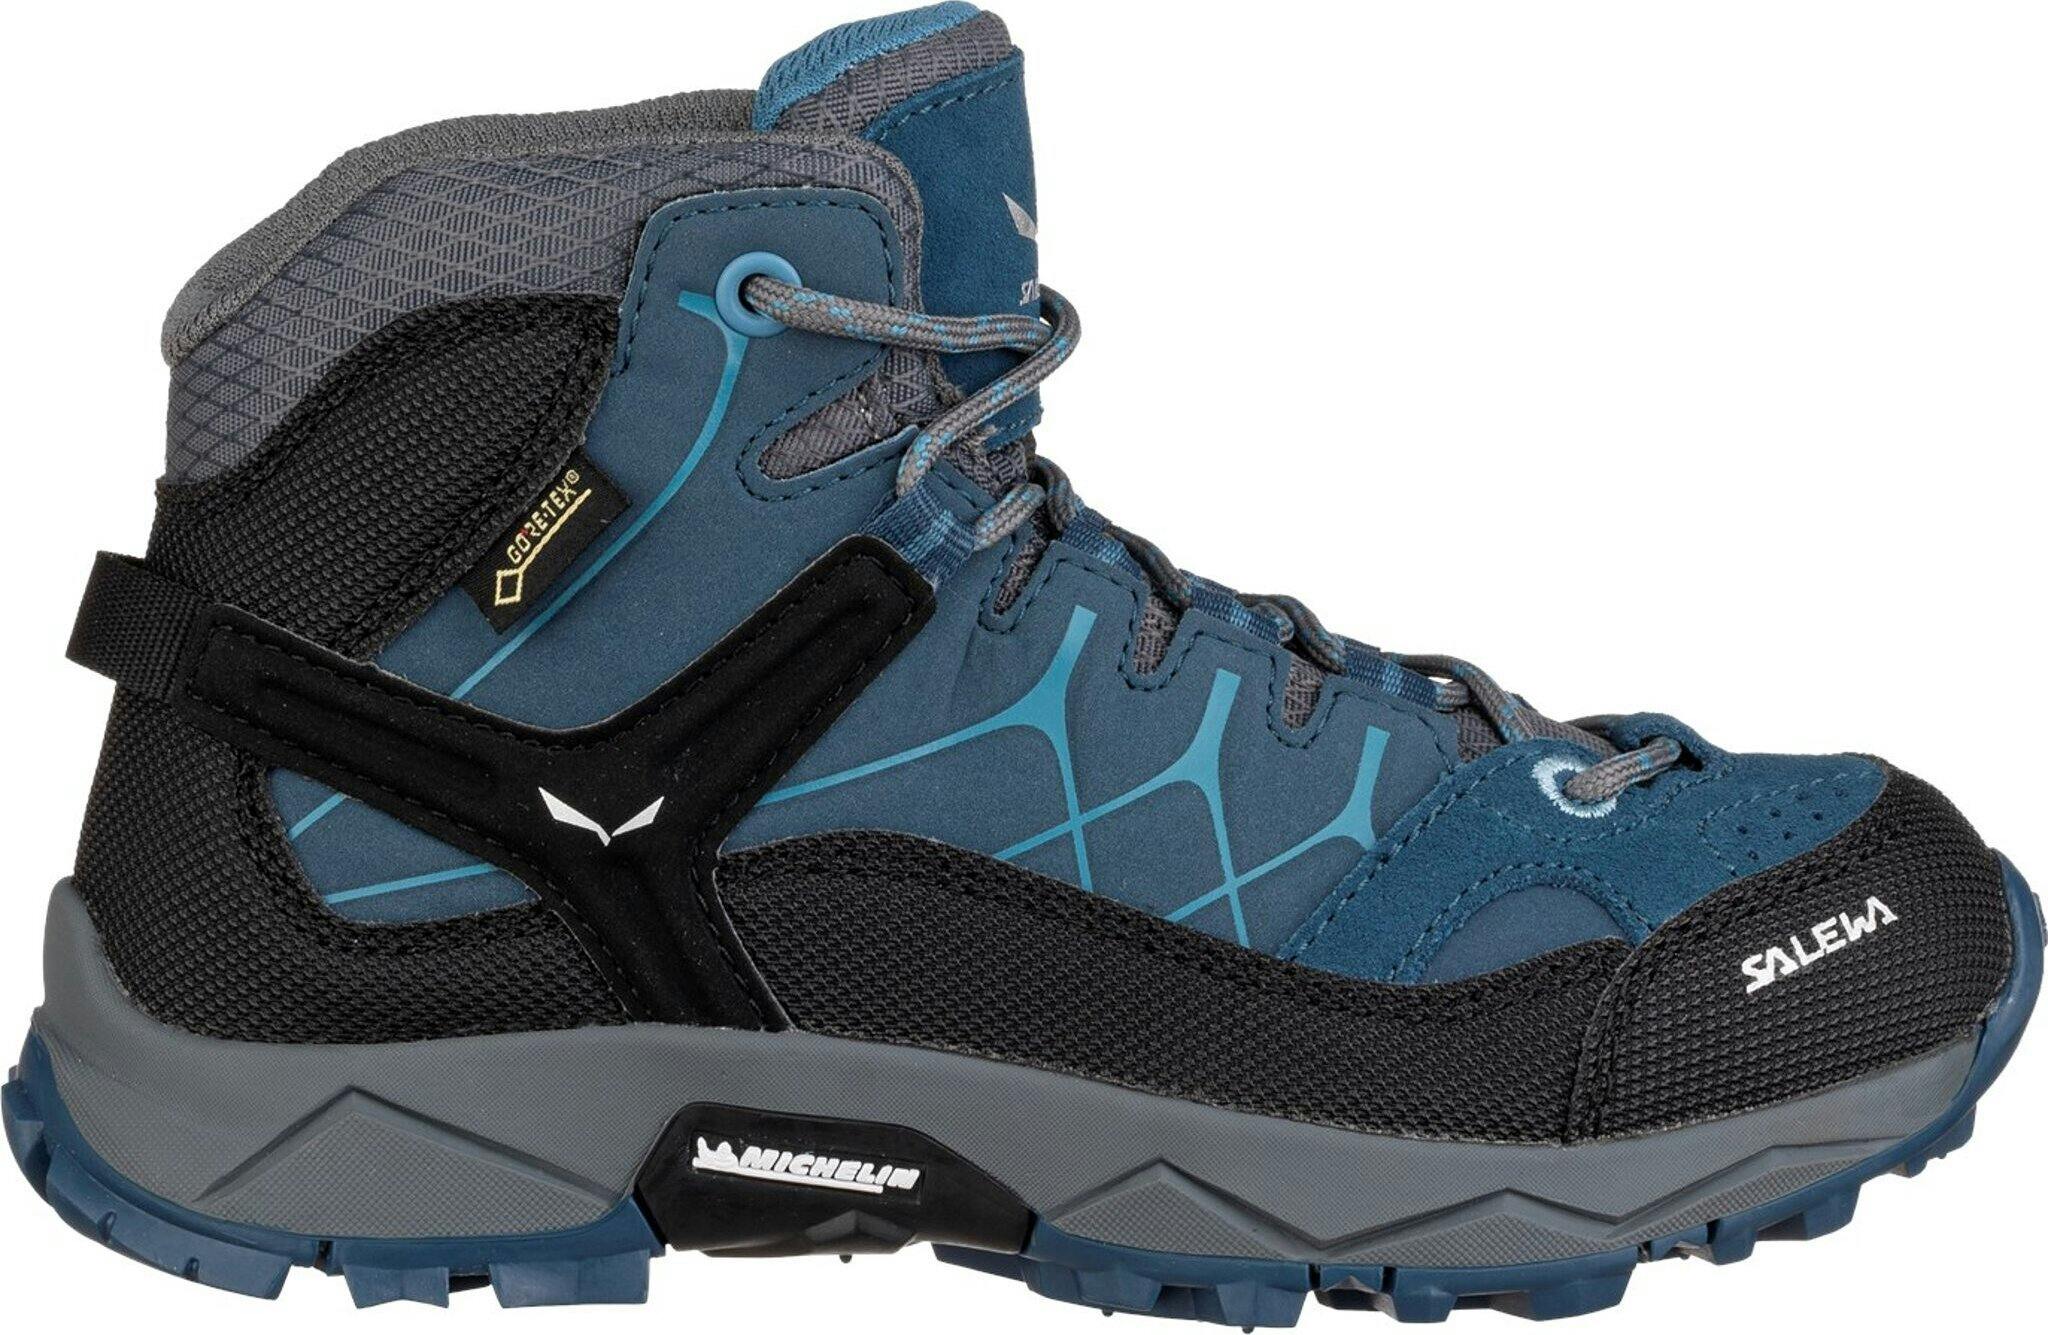 Product image for Alp Trainer Mid Gore-Tex Shoe - Kid's